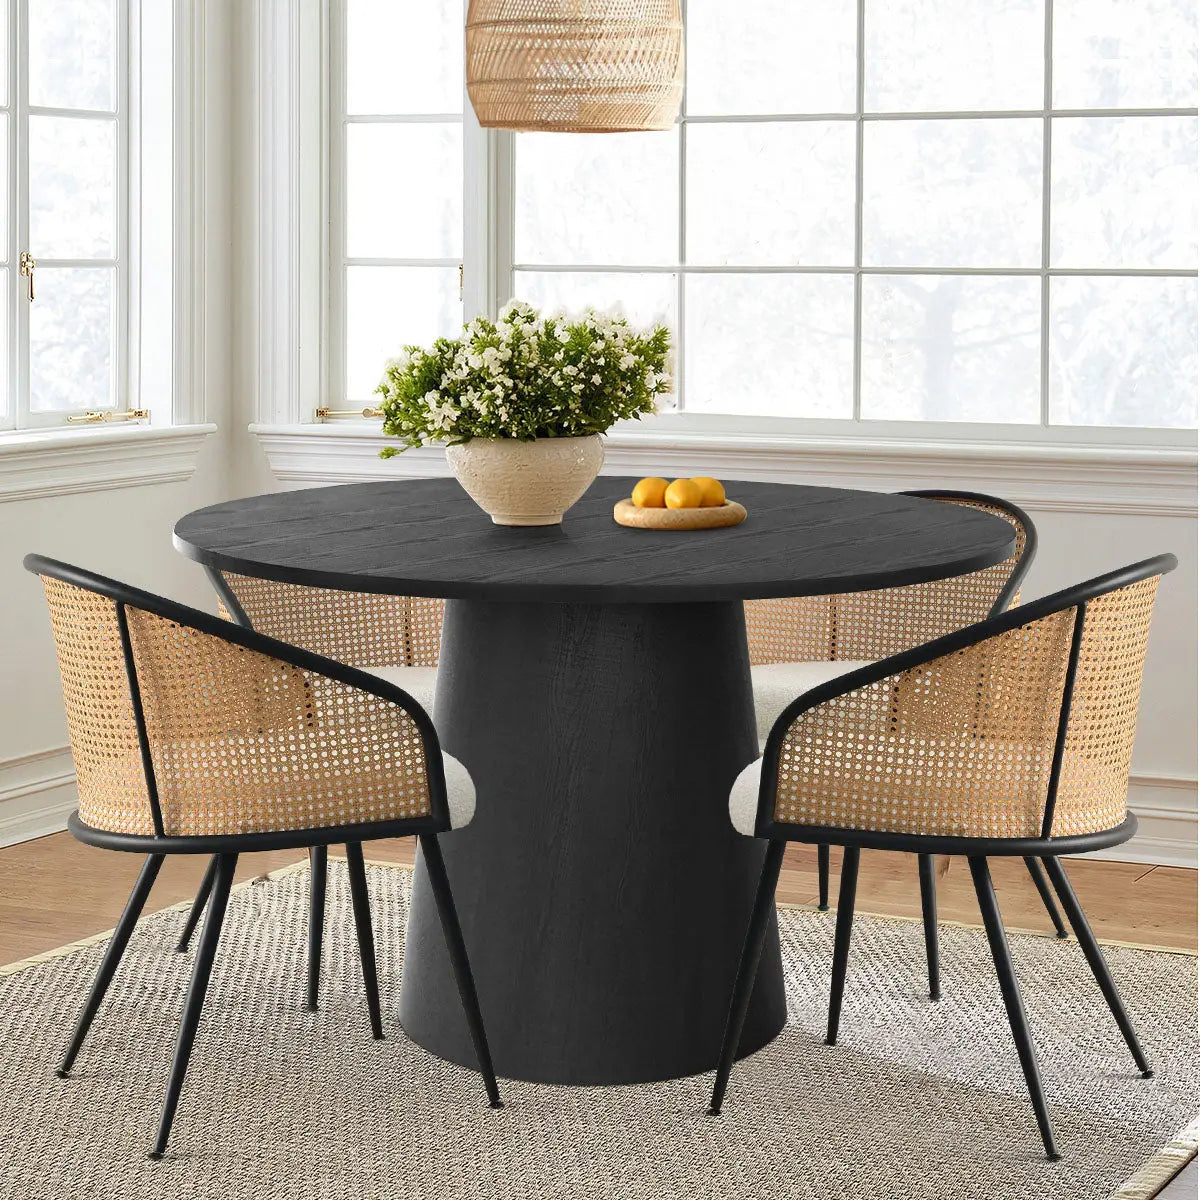 Dwen 46" Table & Jules Dining Chairs with Armrest, Round Pedestal Dining Table Set for 4 - The Pop Maison